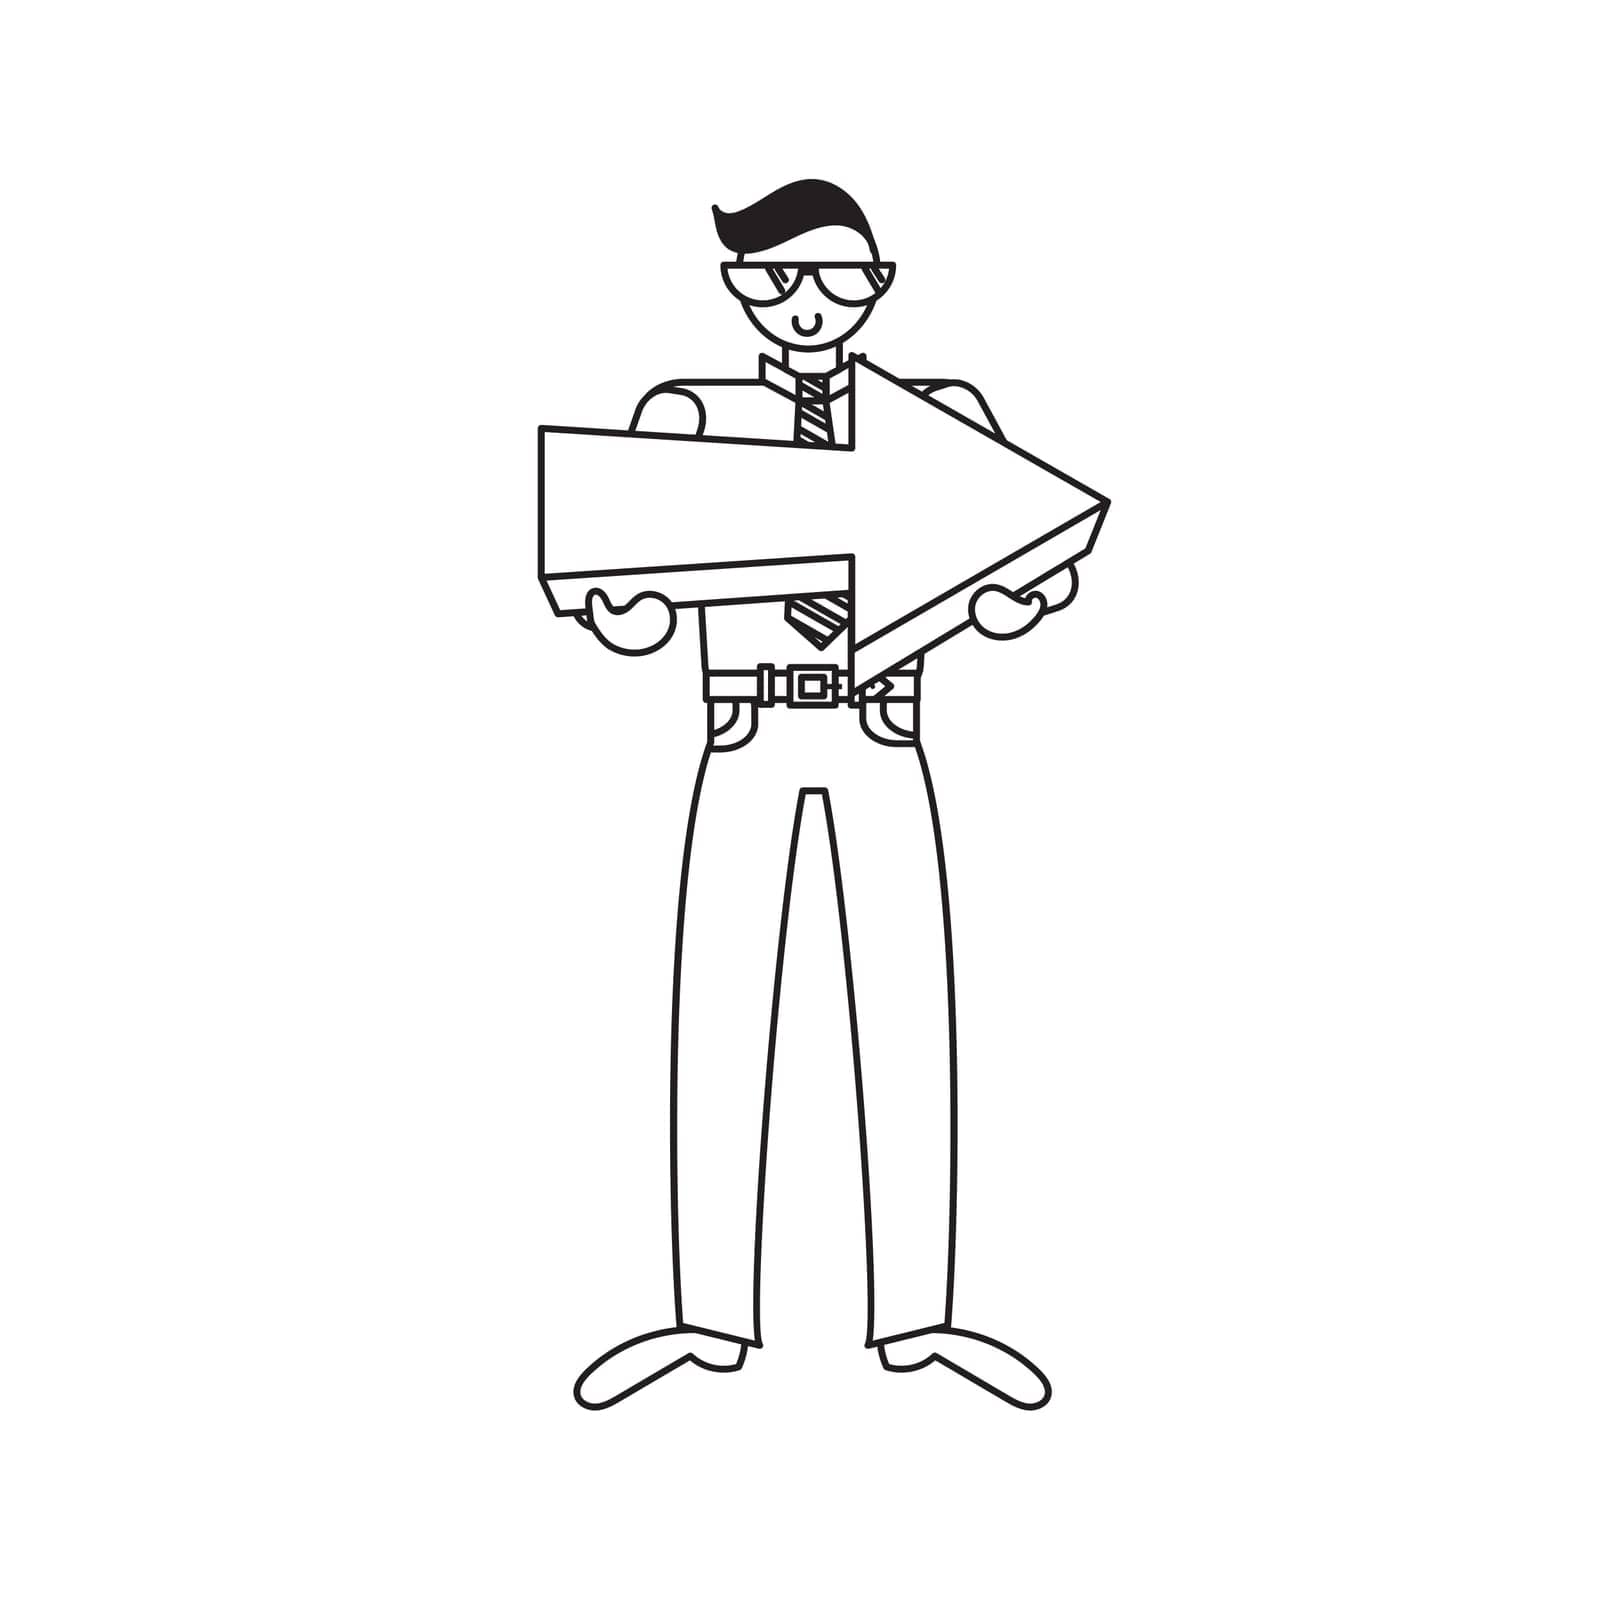 Employee or manager with big arrow in hands. Human with pointer. Vector